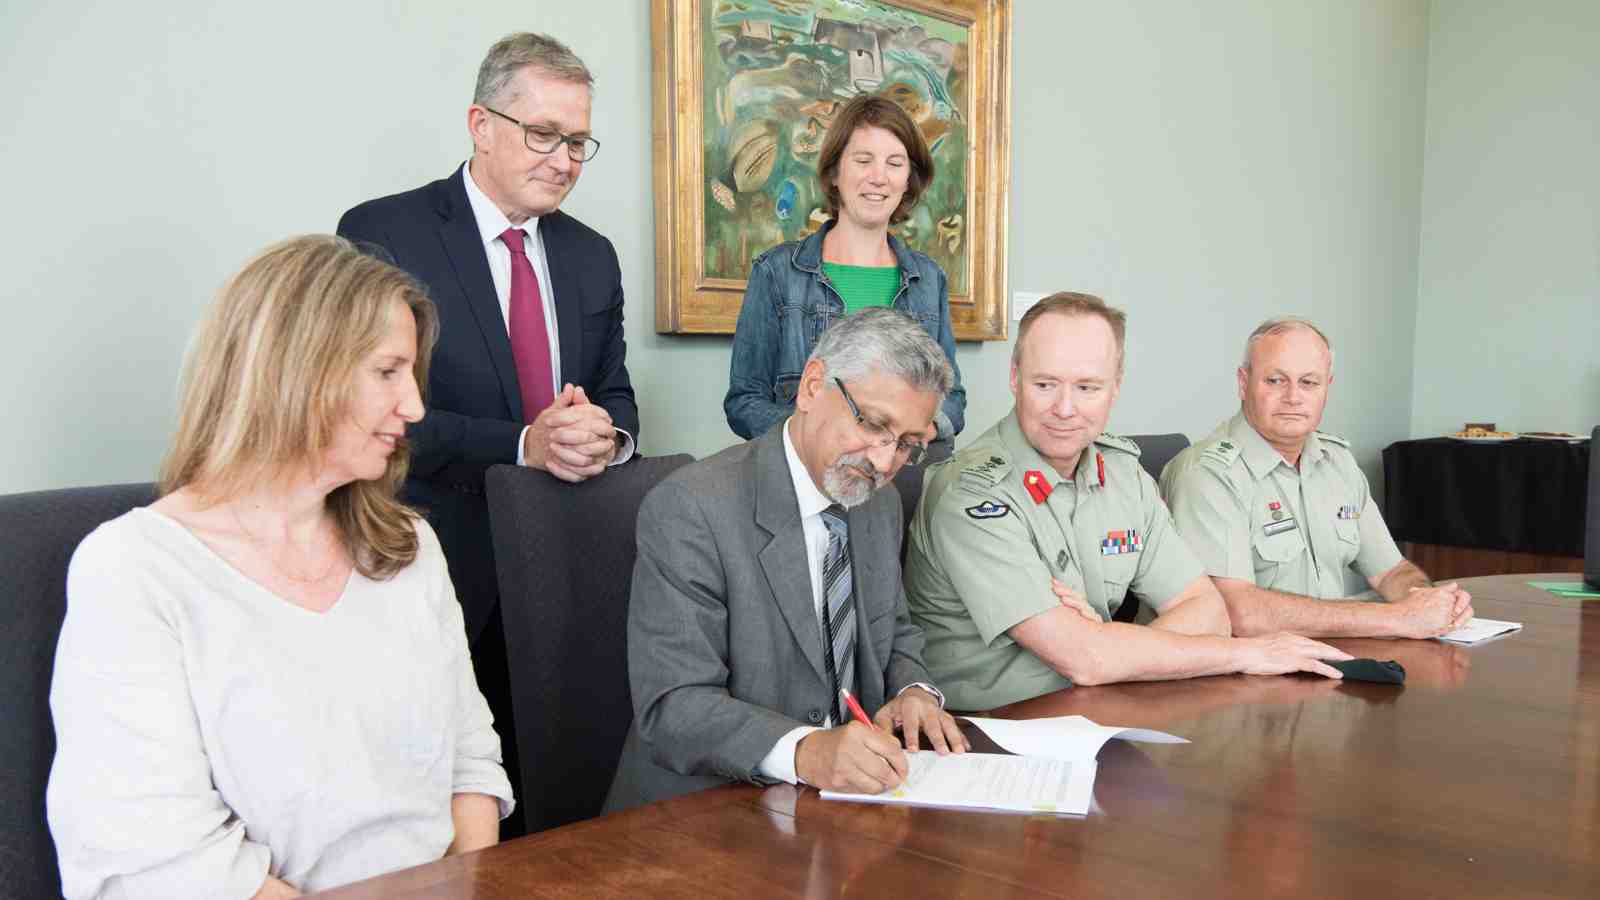 Victoria staff and Defence force staff at a table. A person in the middle is signing a document.